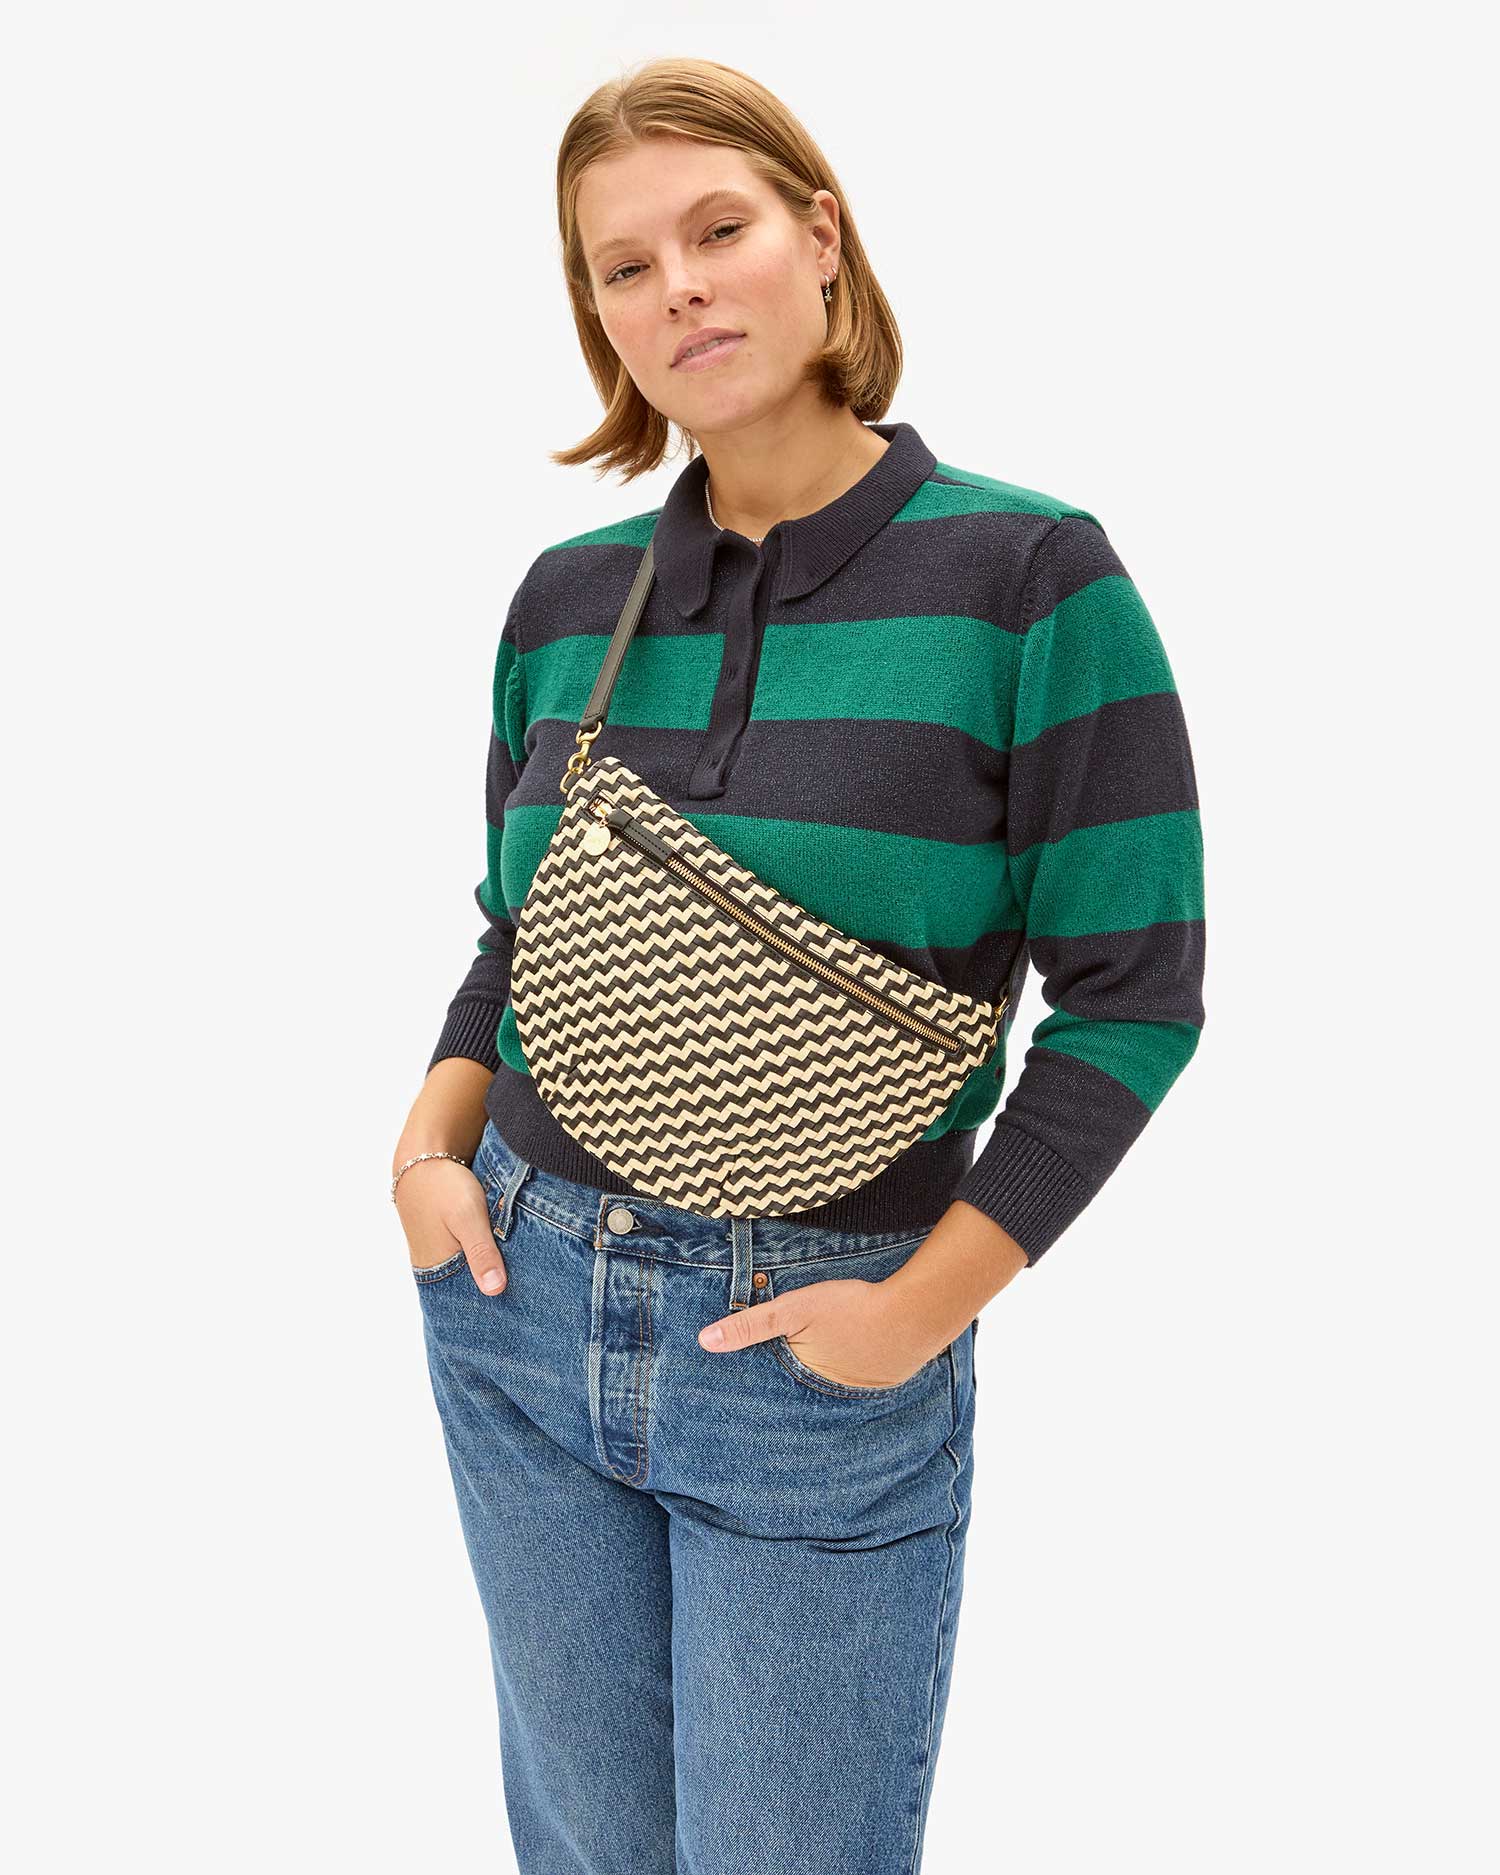 Sonnie wearing the Black & Cream Woven Zig Zag Grande Fanny across her chest over the Heloise polo sweater